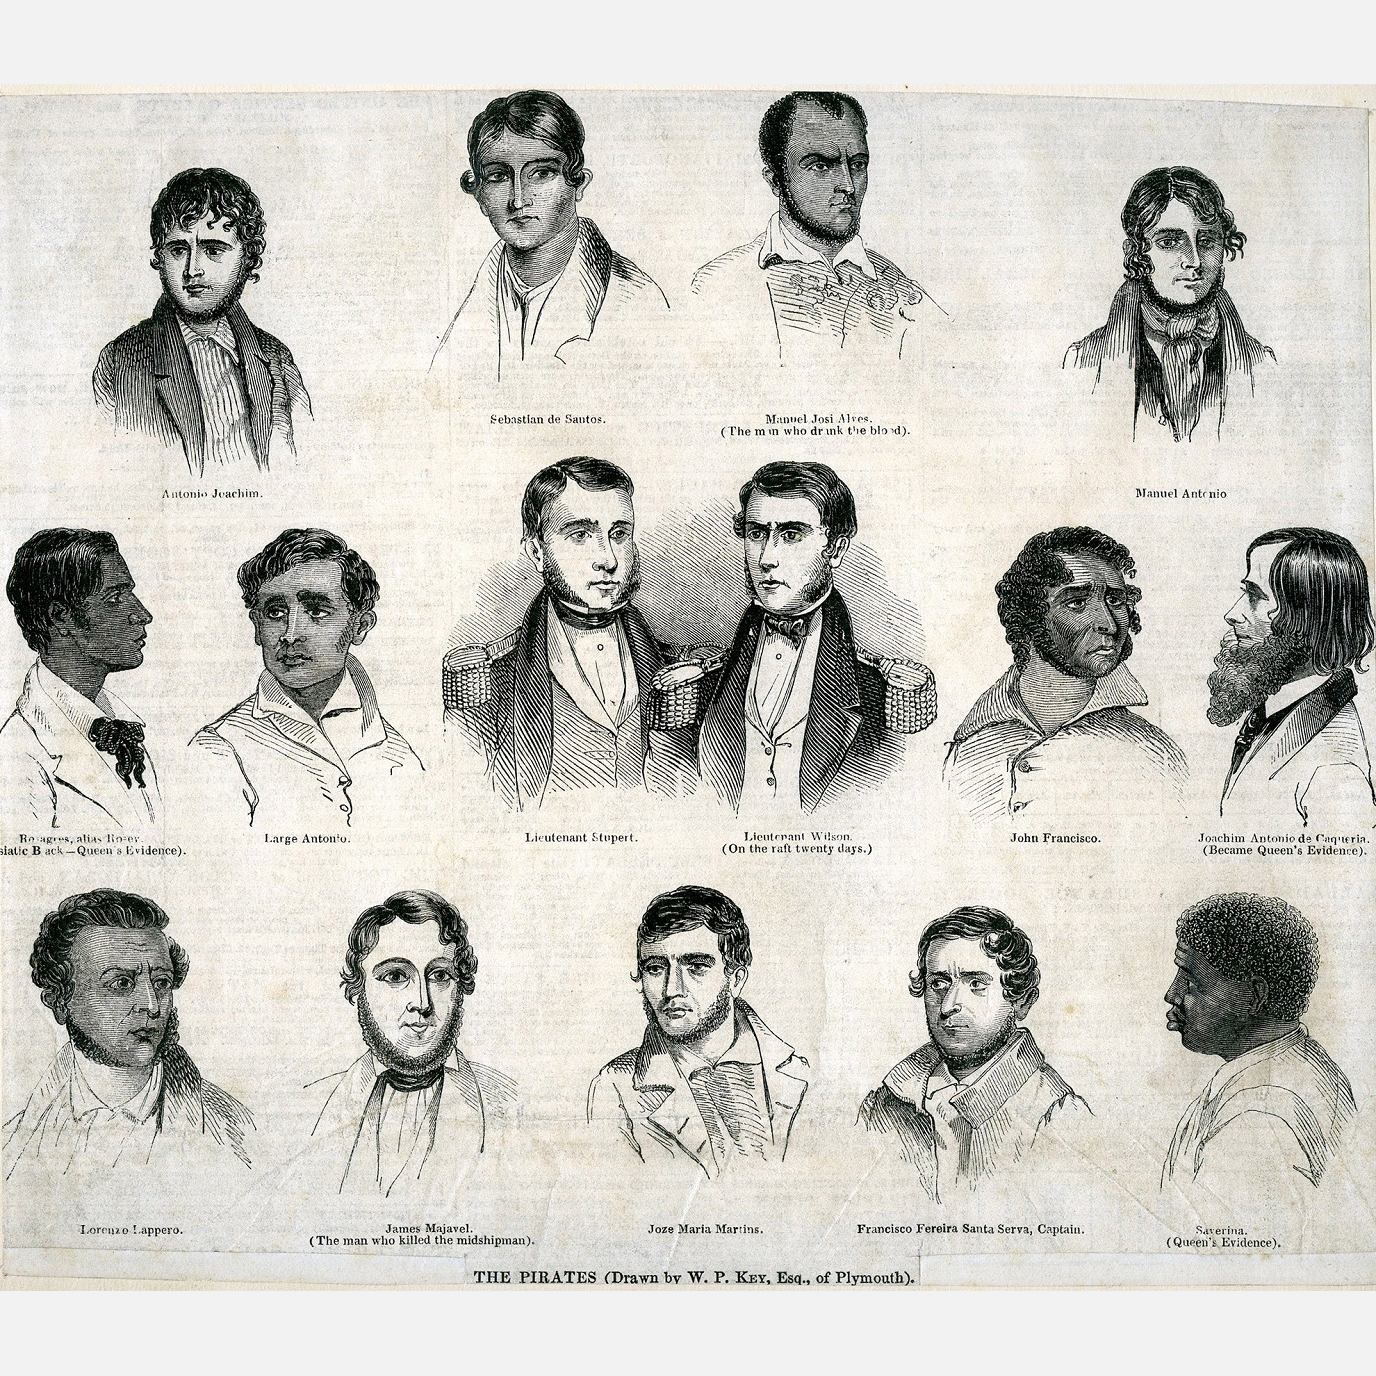 Illustration of the Brazilian pirates, who were arrested at Plymouth and sent to the Devon County Assizes, and two of the Royal Naval Officers (centre). Drawn by W P Key, esquire, of Plymouth.